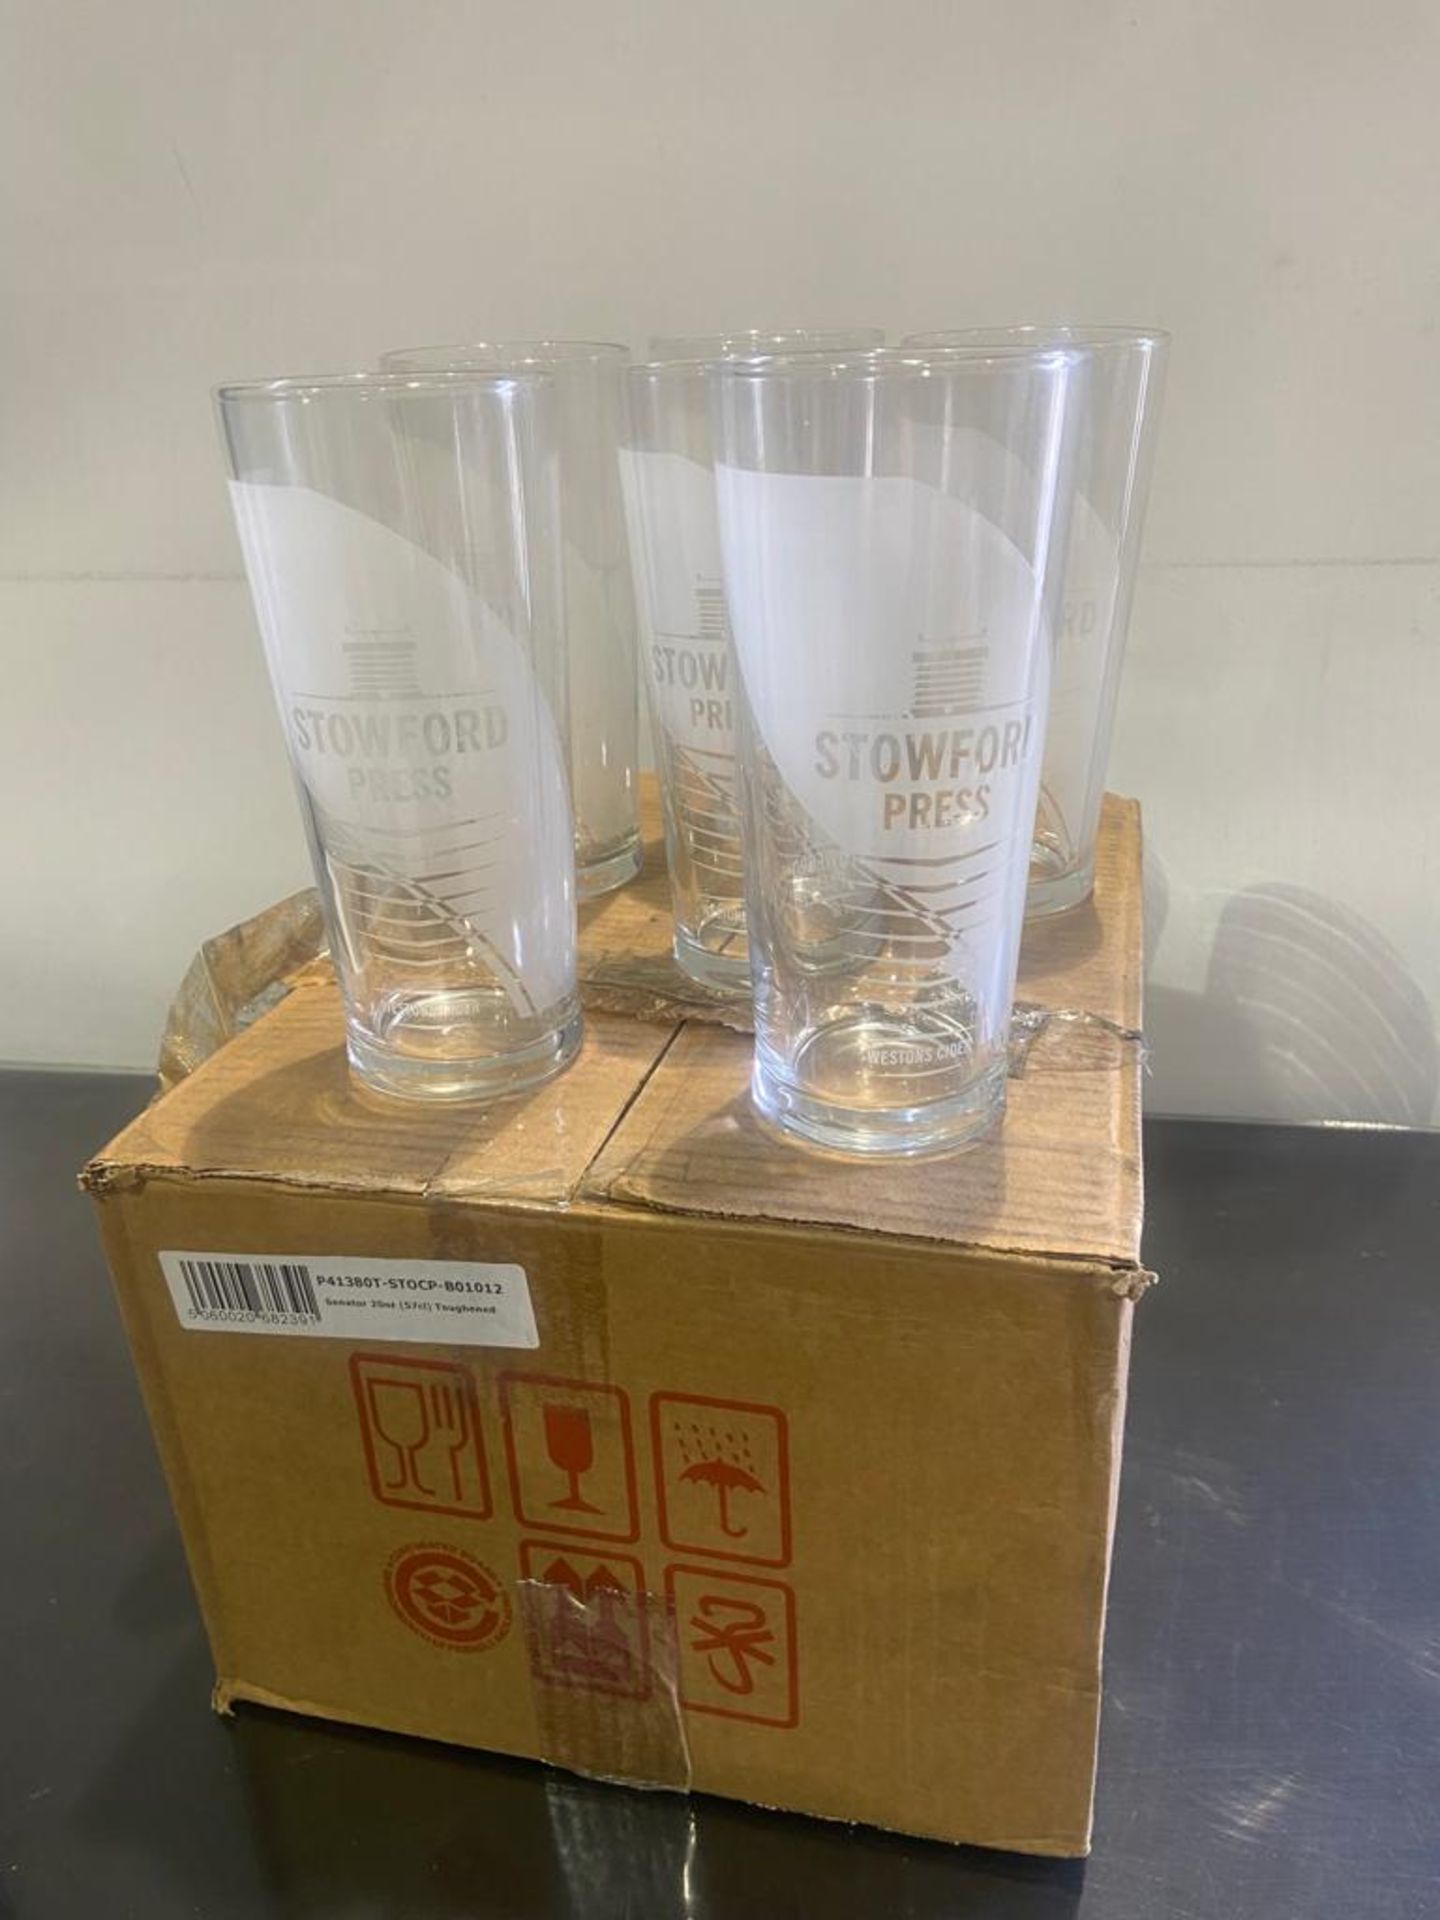 10 boxes of stoford press pint glasse